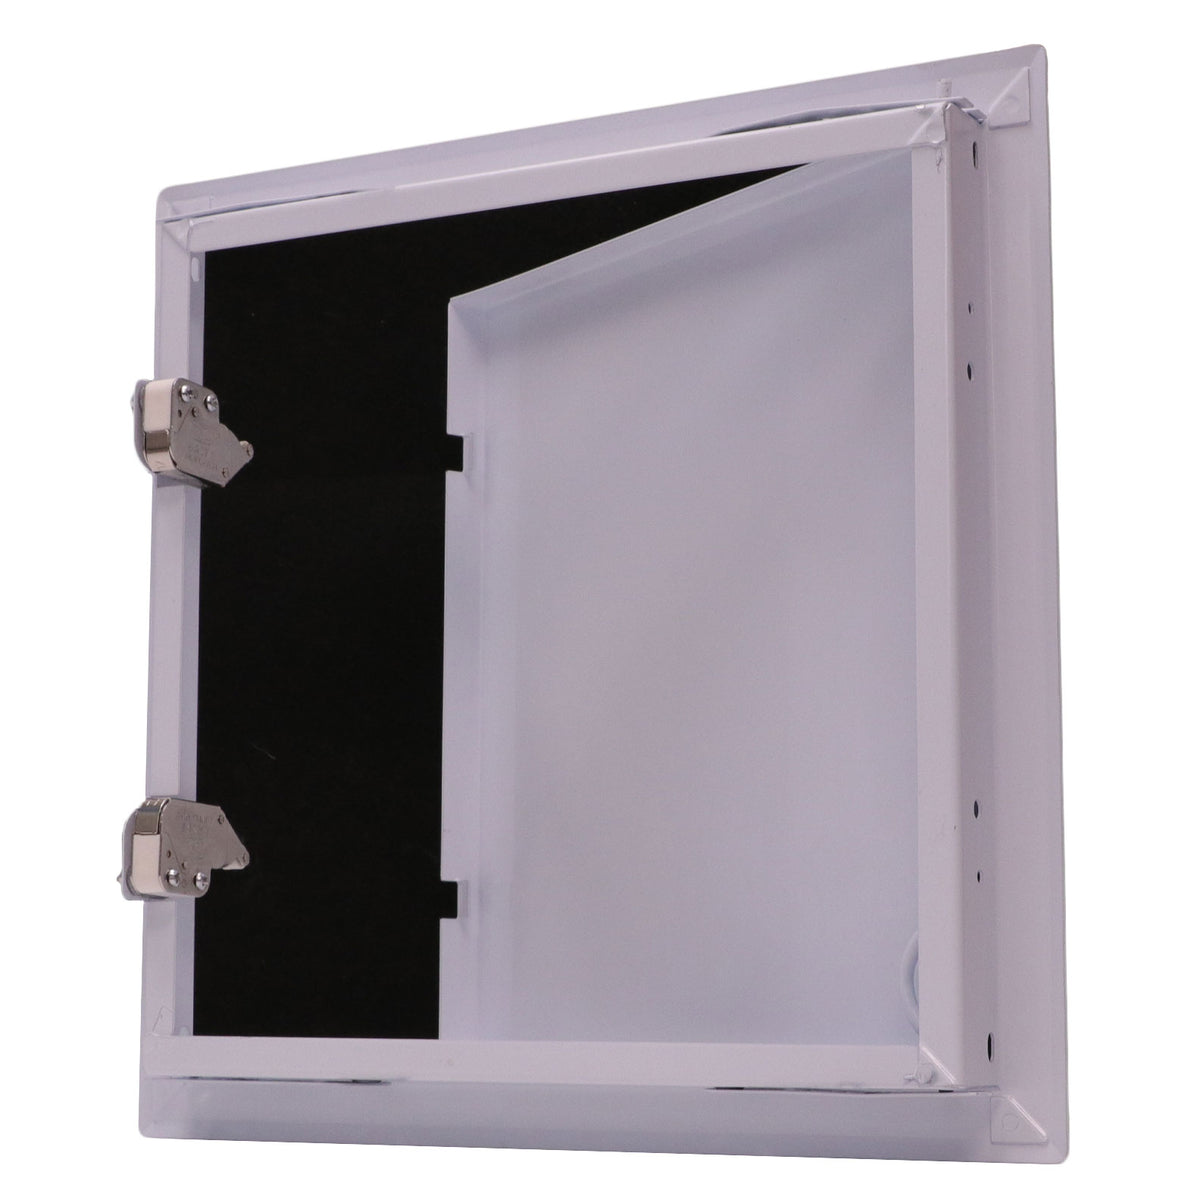 6&quot; X 6&quot; Universal Aluminum Access Panel Door For Wall / Ceiling Application (Push-Lock) With Solid Frame - [Outer Dimensions: 7&quot; Width X 7&quot; Height]